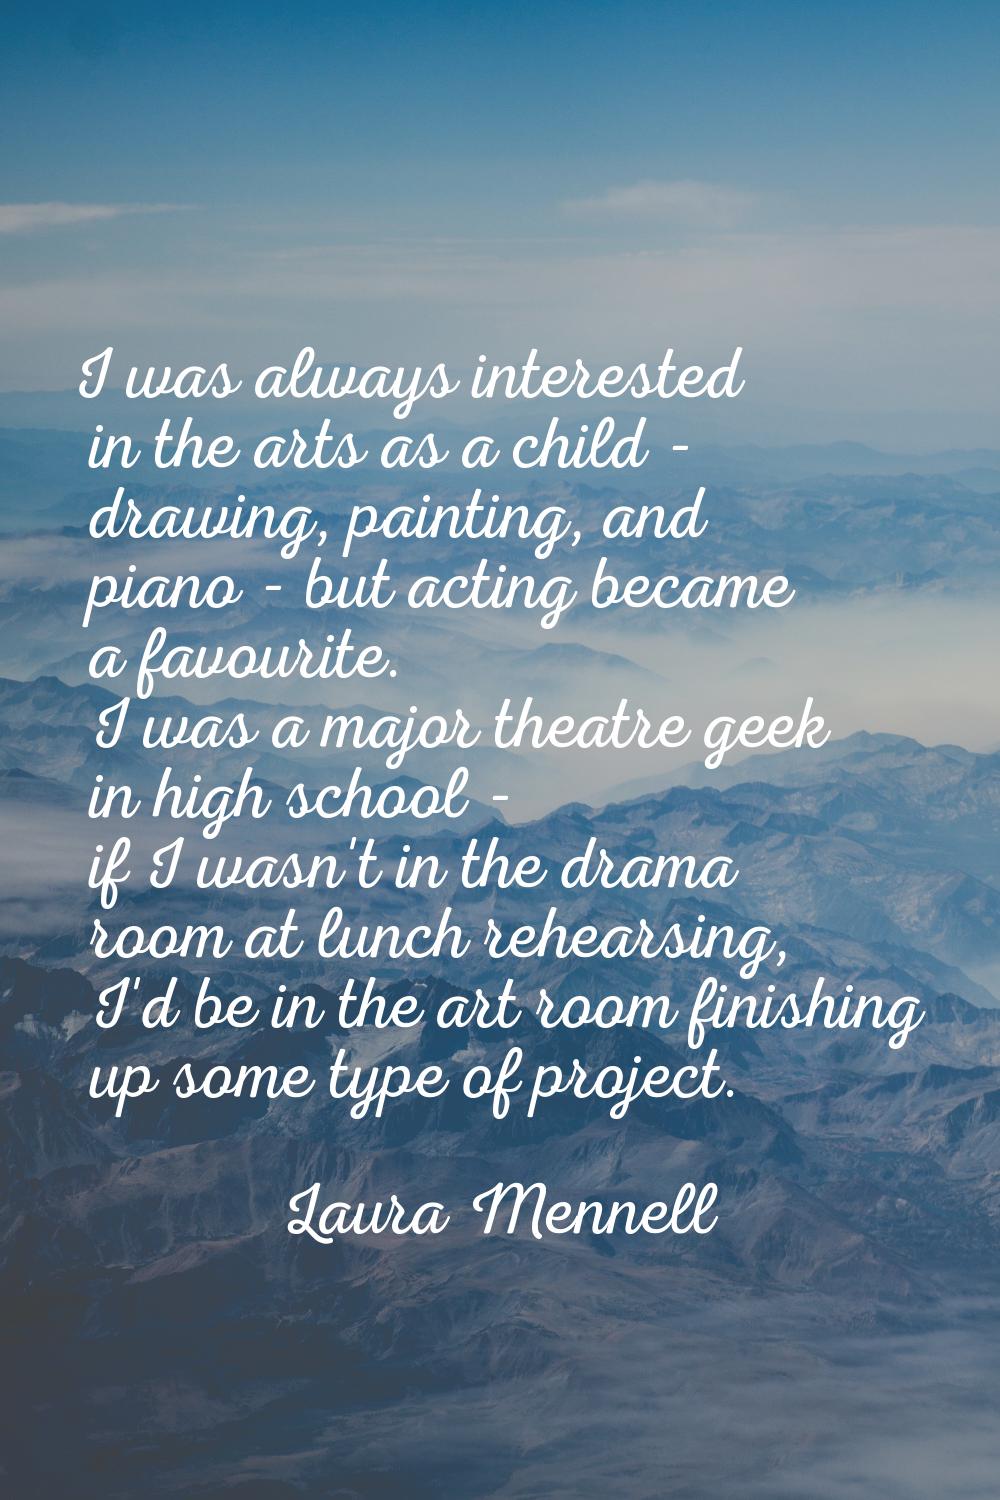 I was always interested in the arts as a child - drawing, painting, and piano - but acting became a